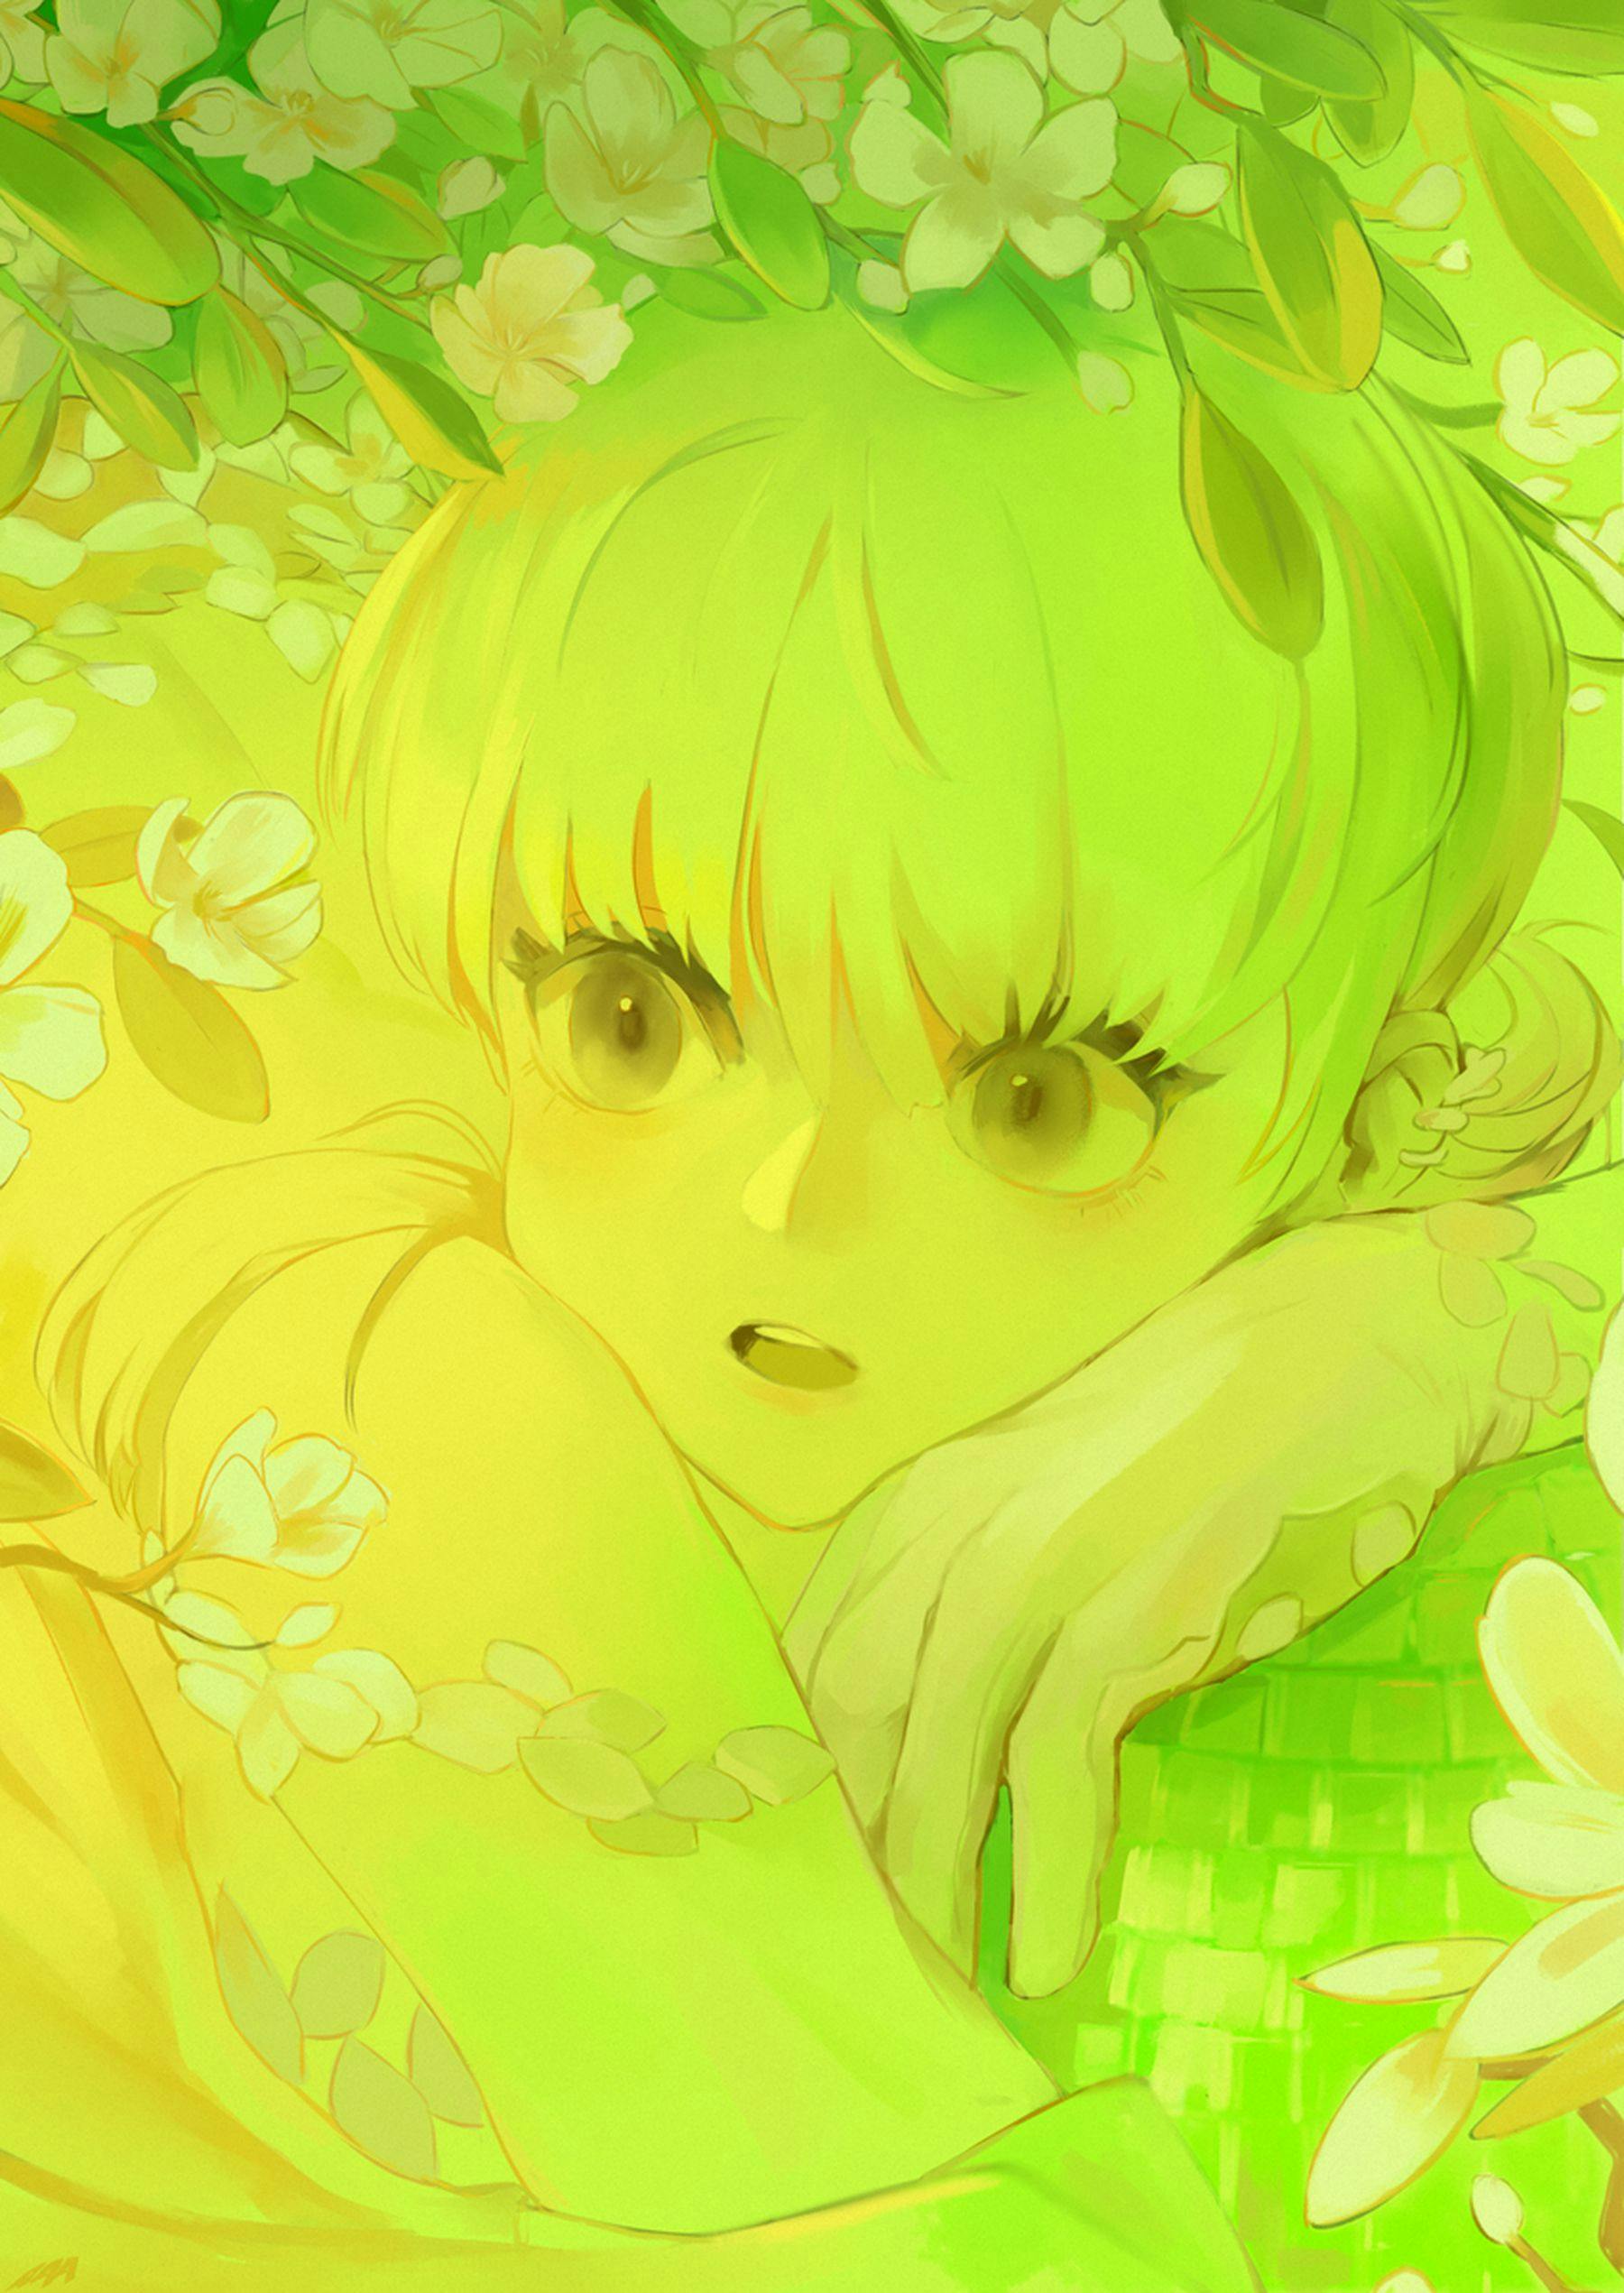 An anime style illustration of a person with large eyes and a long fringe. They are resting against their hand and are surrounded by flowers. The image is tones of green.